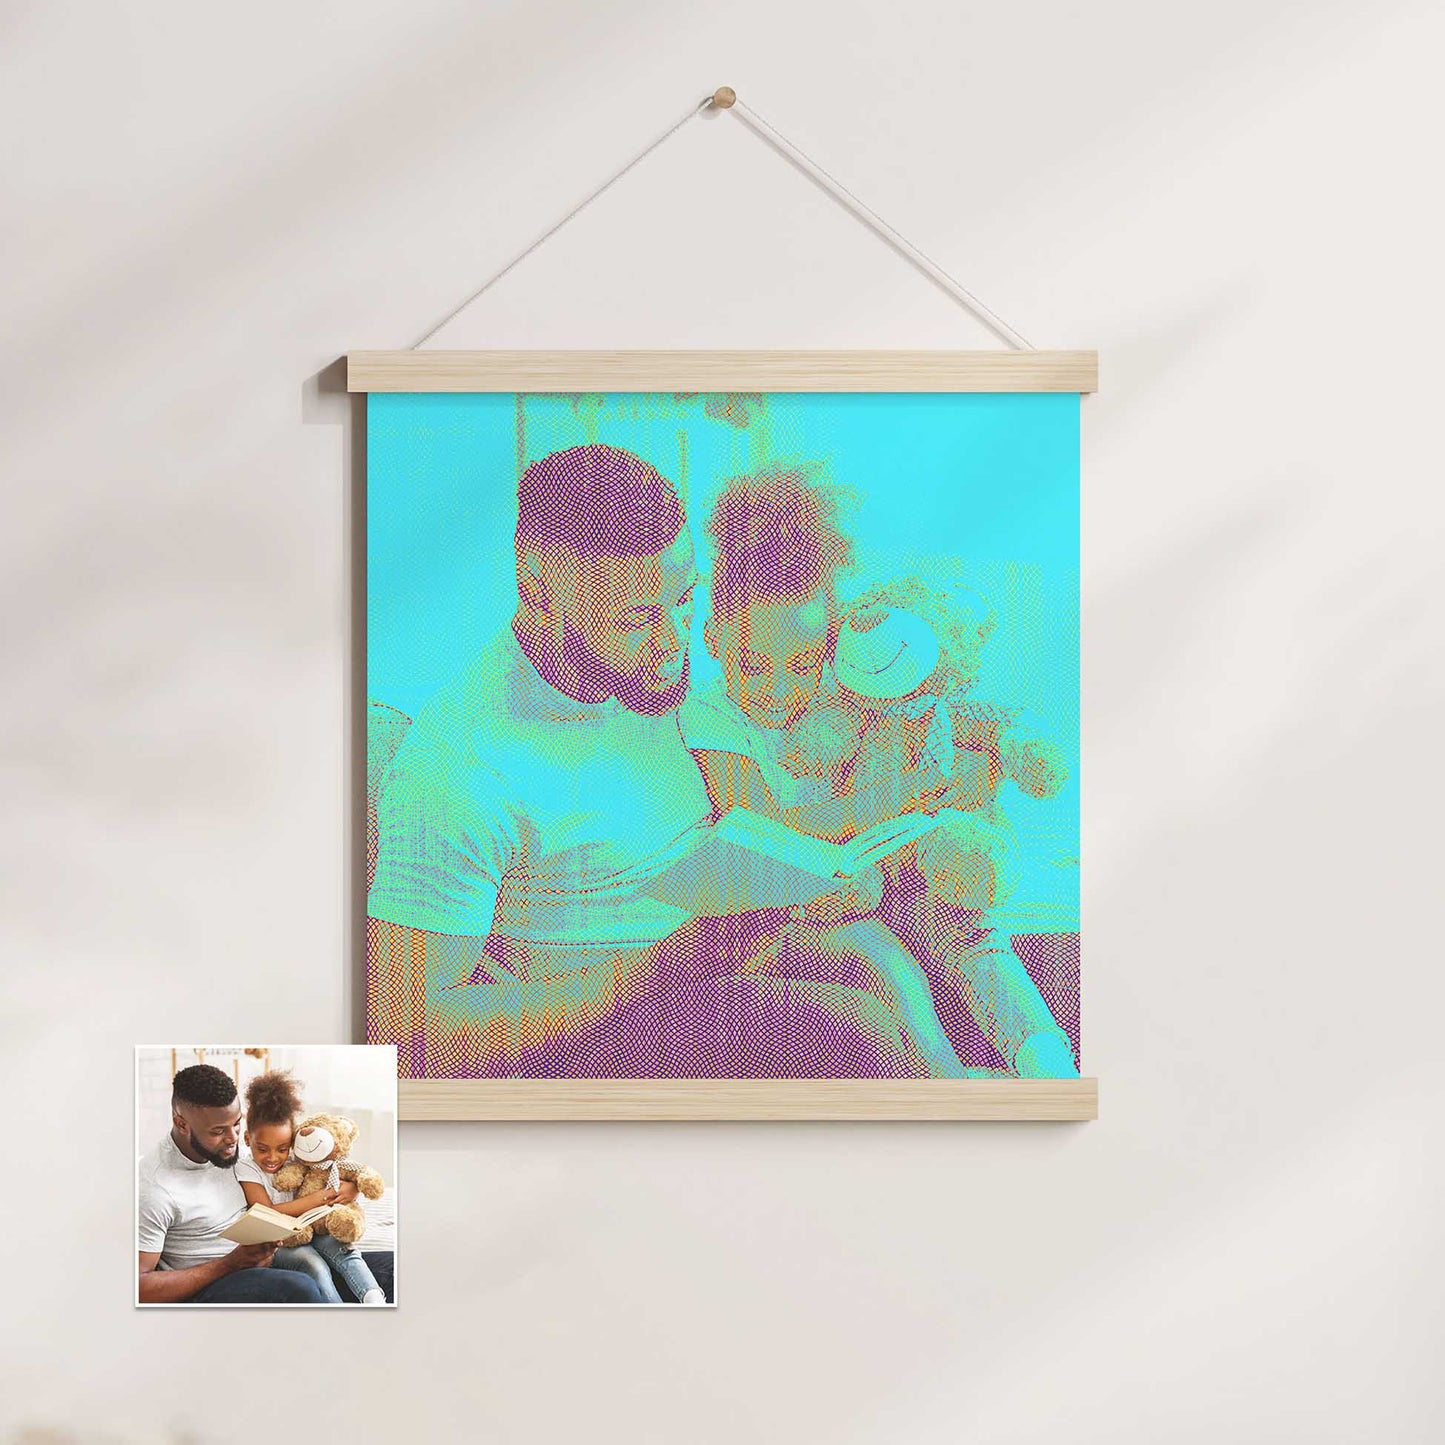 Experience the magic of our Personalised Blue Engraved Poster Hanger. Your cherished photo is transformed into a work of art with an engraved effect and vibrant blue and purple hues. This cool and creative design idea adds a unique touch to home decor